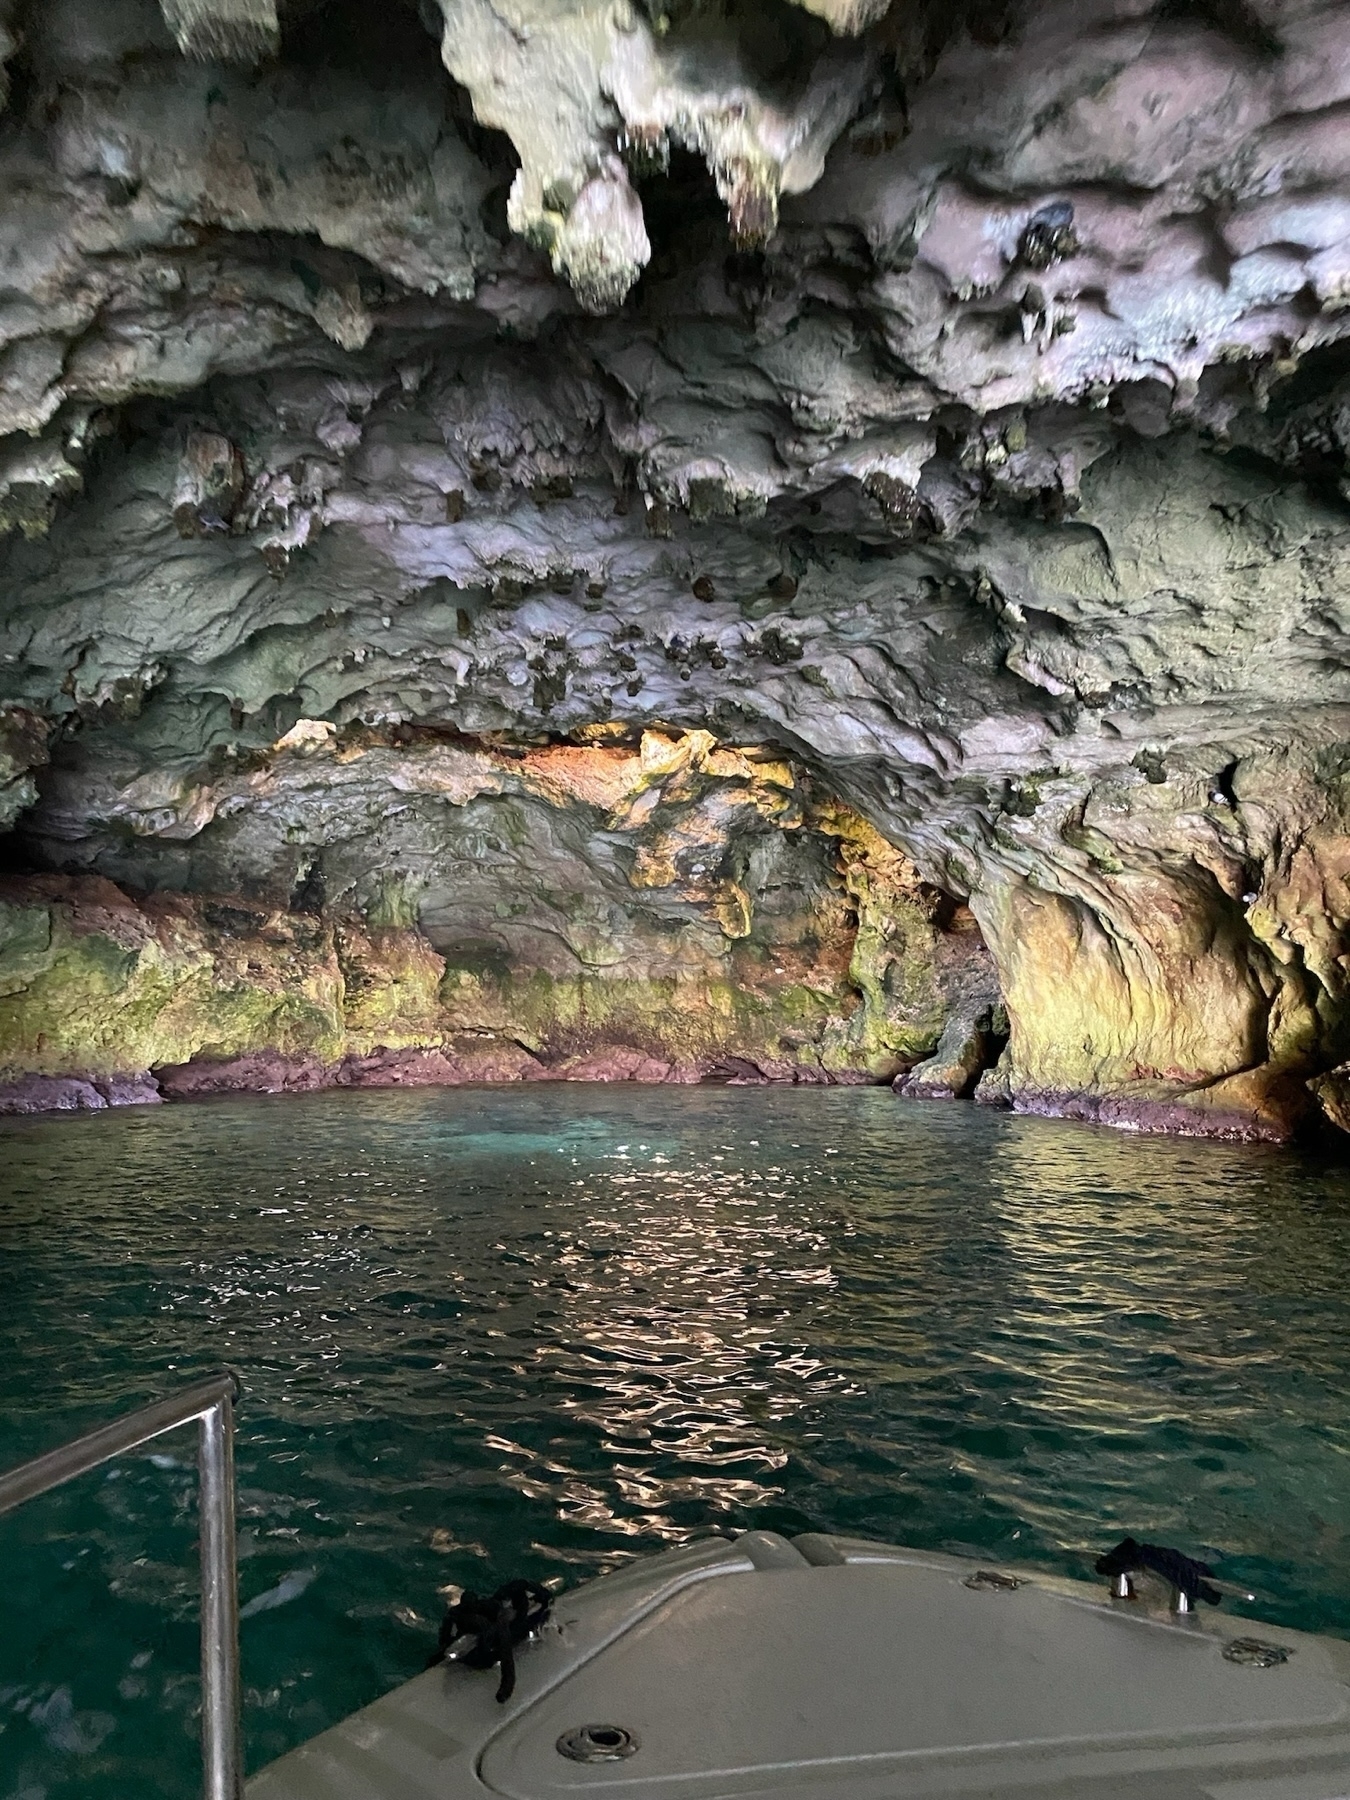 A photo taken from a boat inside a cave with greenish-blue water. The cave walls and ceiling are rocky, with varying shades of green, purple, and brown due to mineral deposits and lighting.